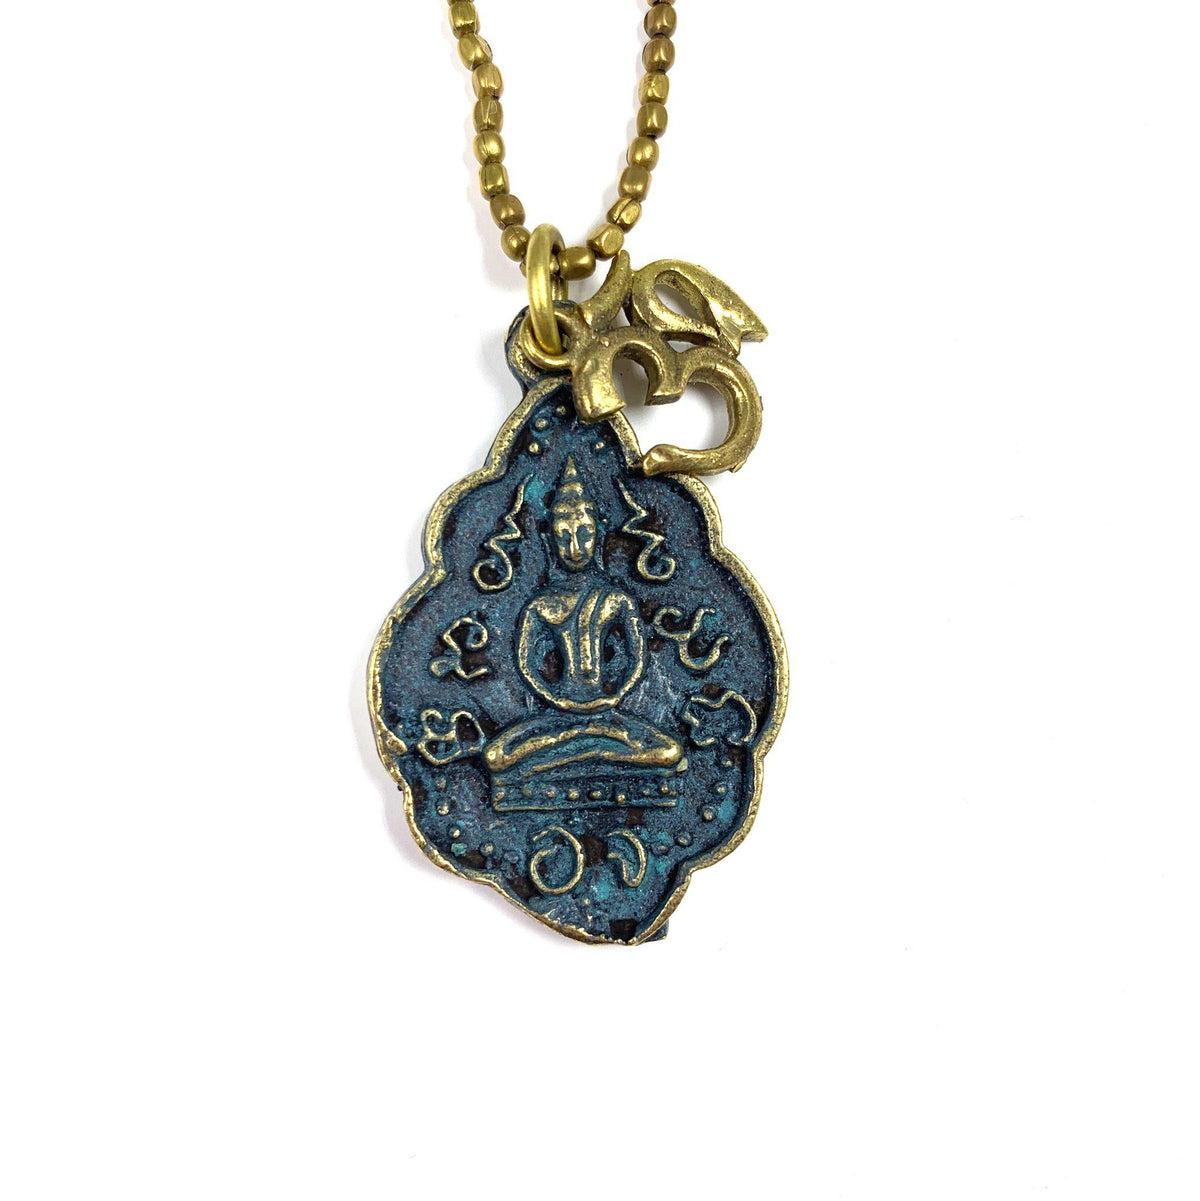 Bali Antique Buddha Necklace with Om Charm